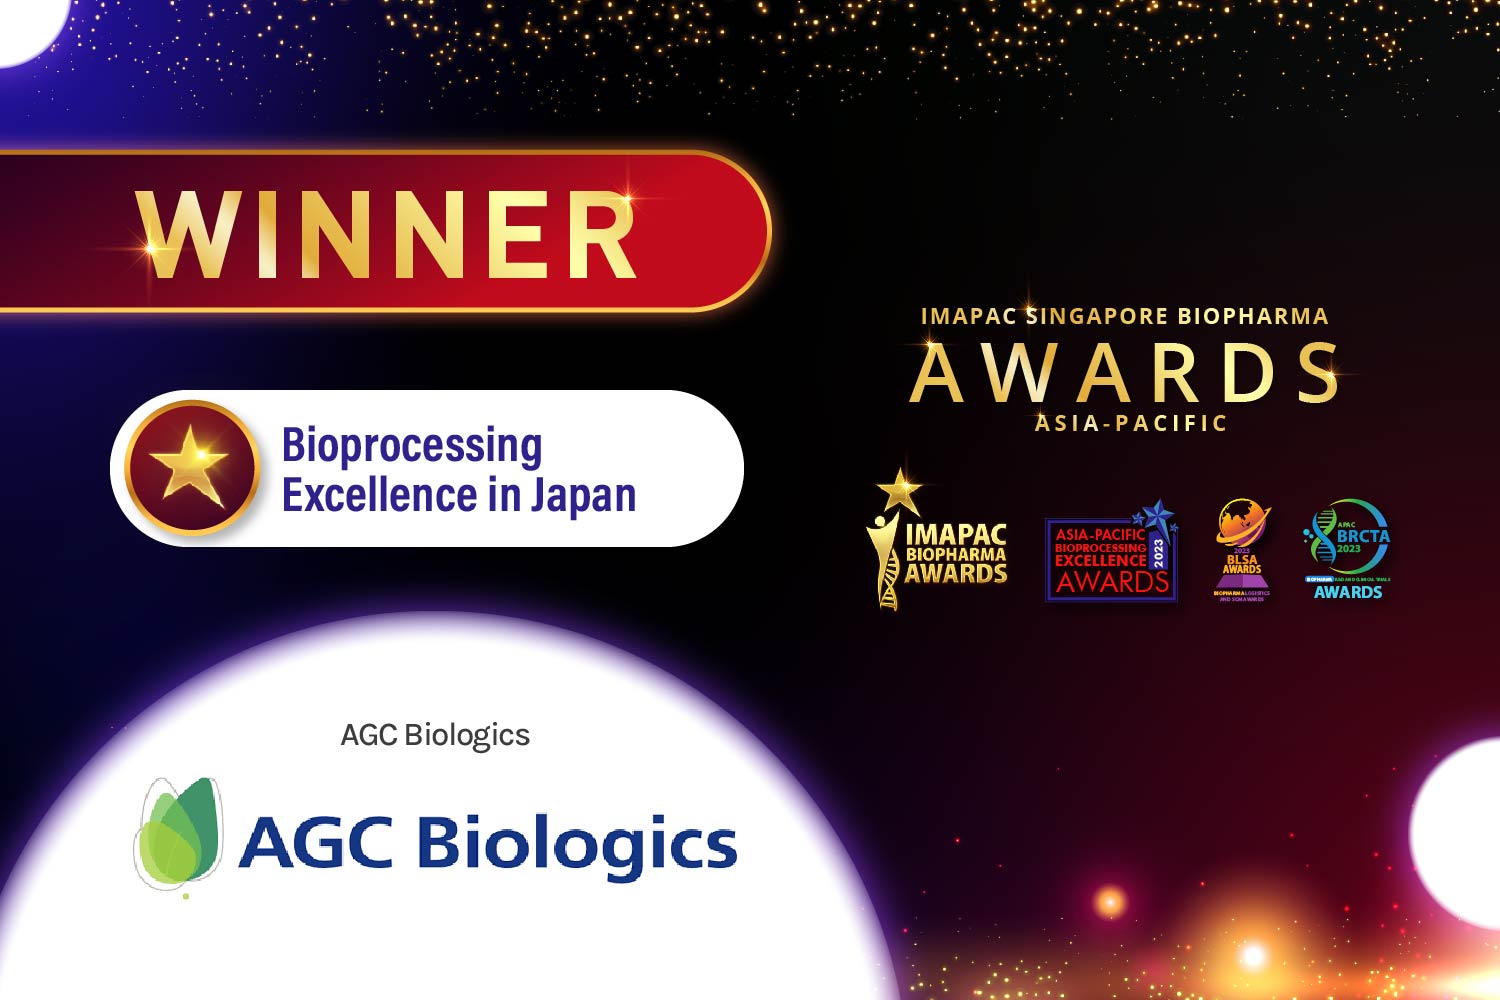 AGC Biologics Receives Bioprocessing Excellence Award in Japan for Work at Chiba Site